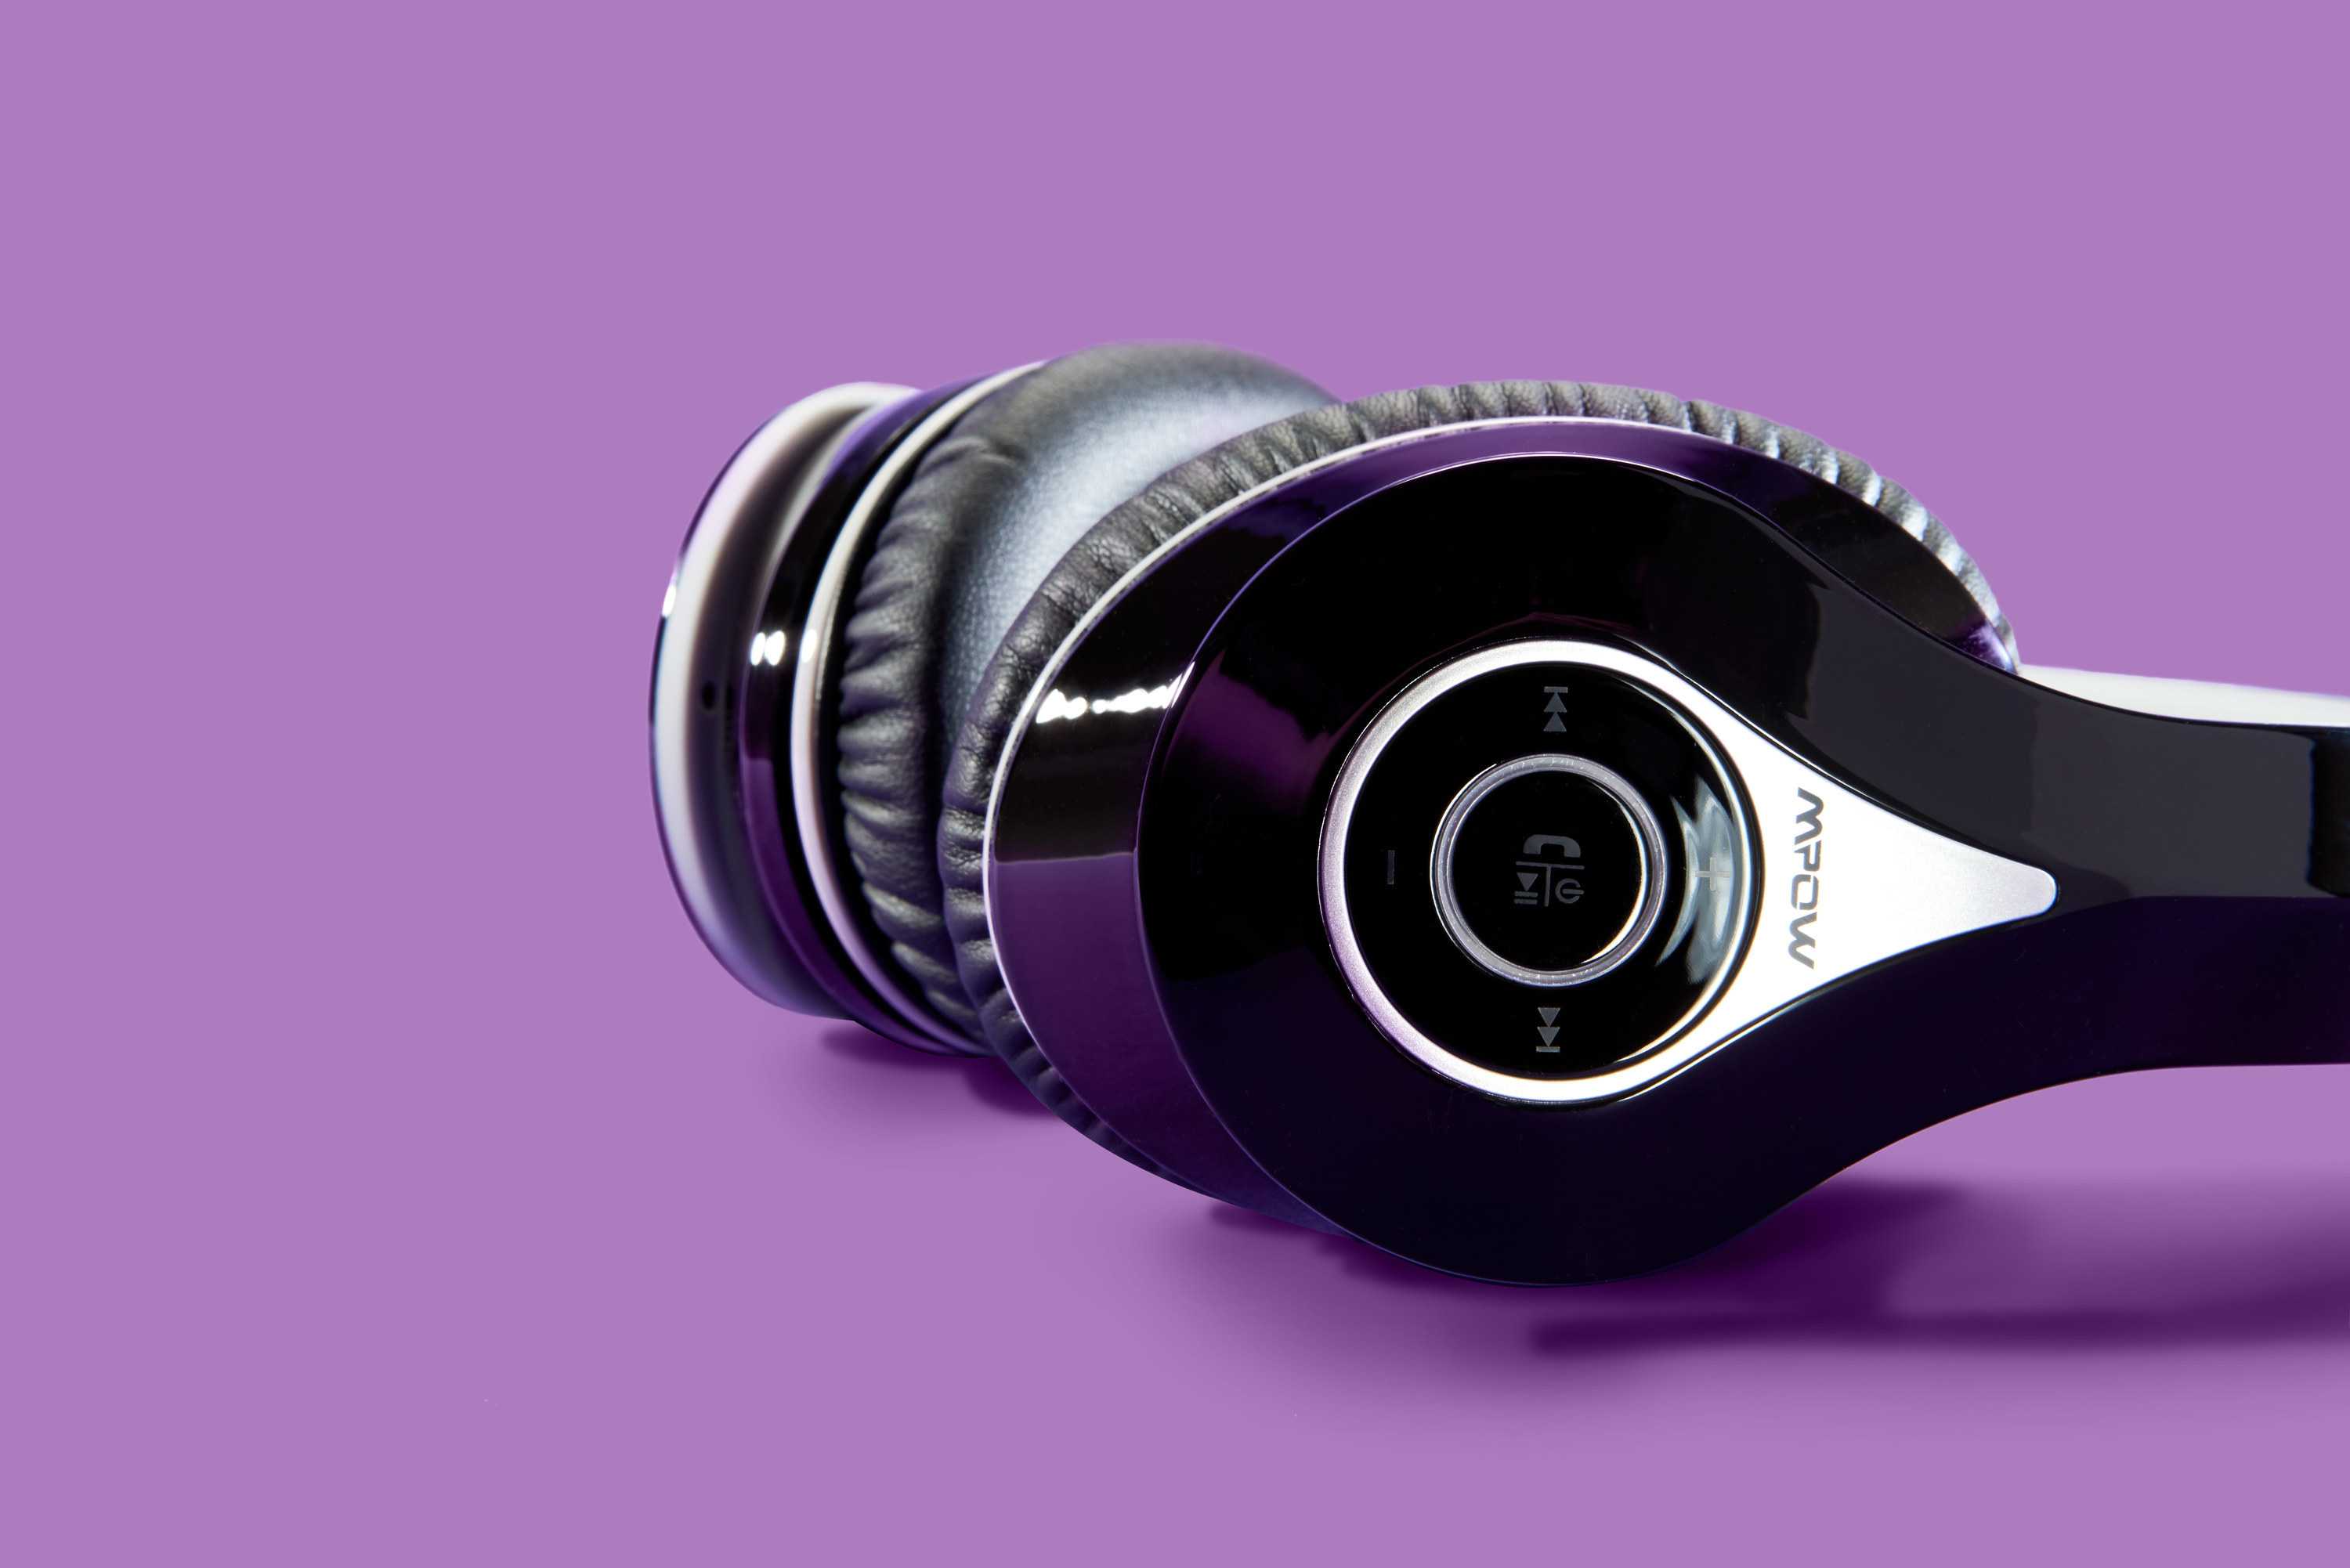 The headphones with controls for fast forward, call, play, and pause 